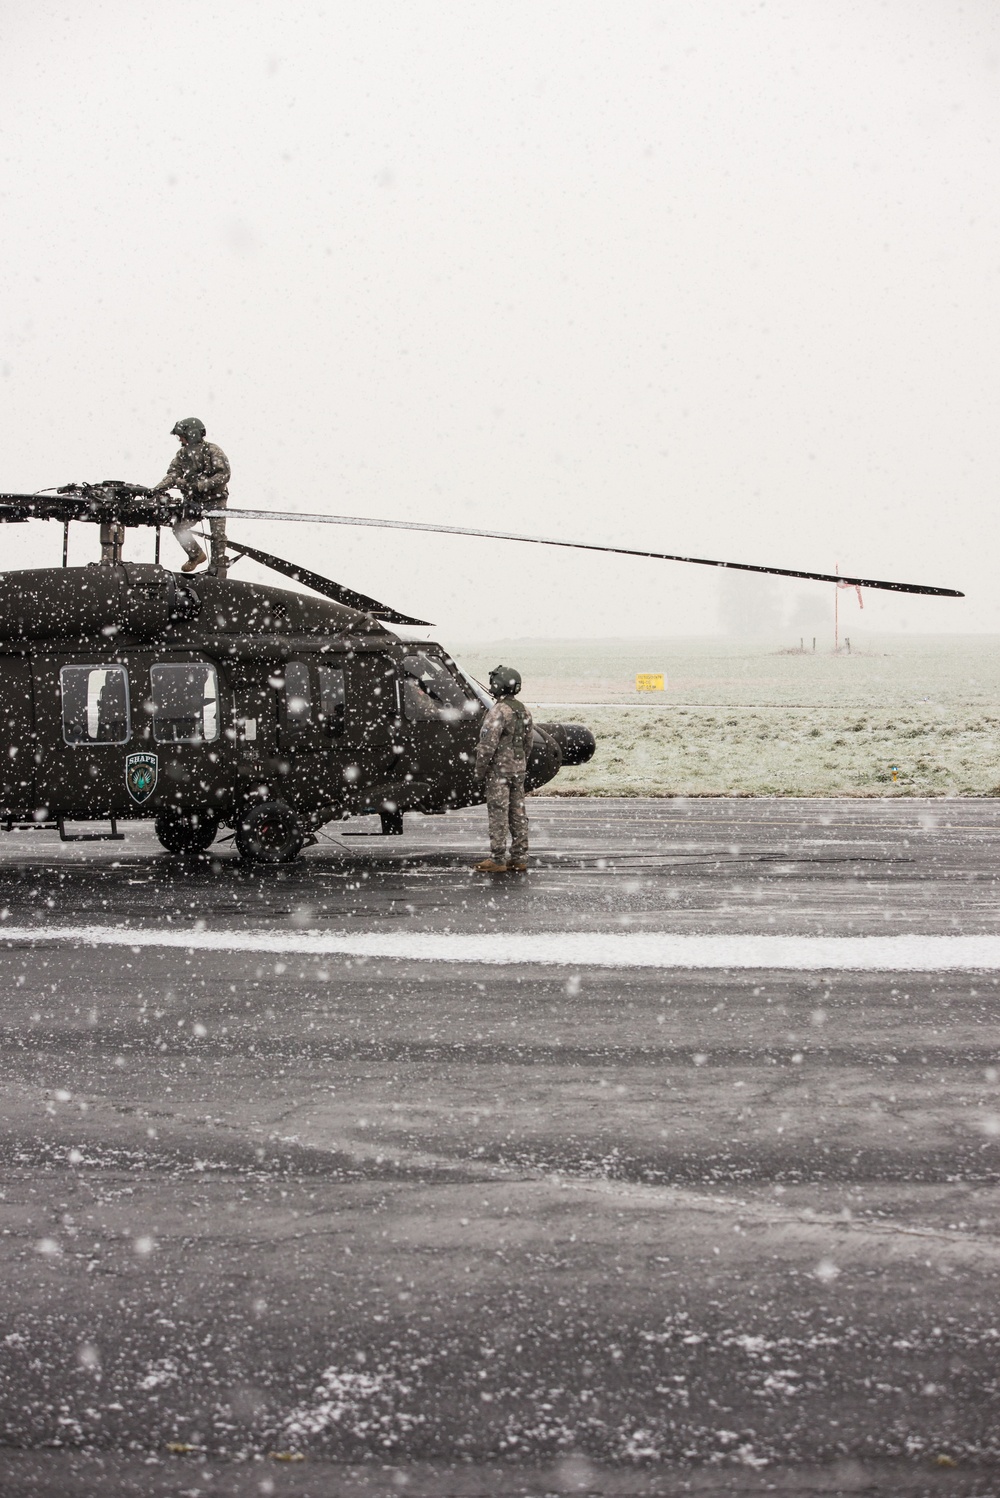 UH-60A Black Hawk Helicopter pre-flight checks and take off in the snow